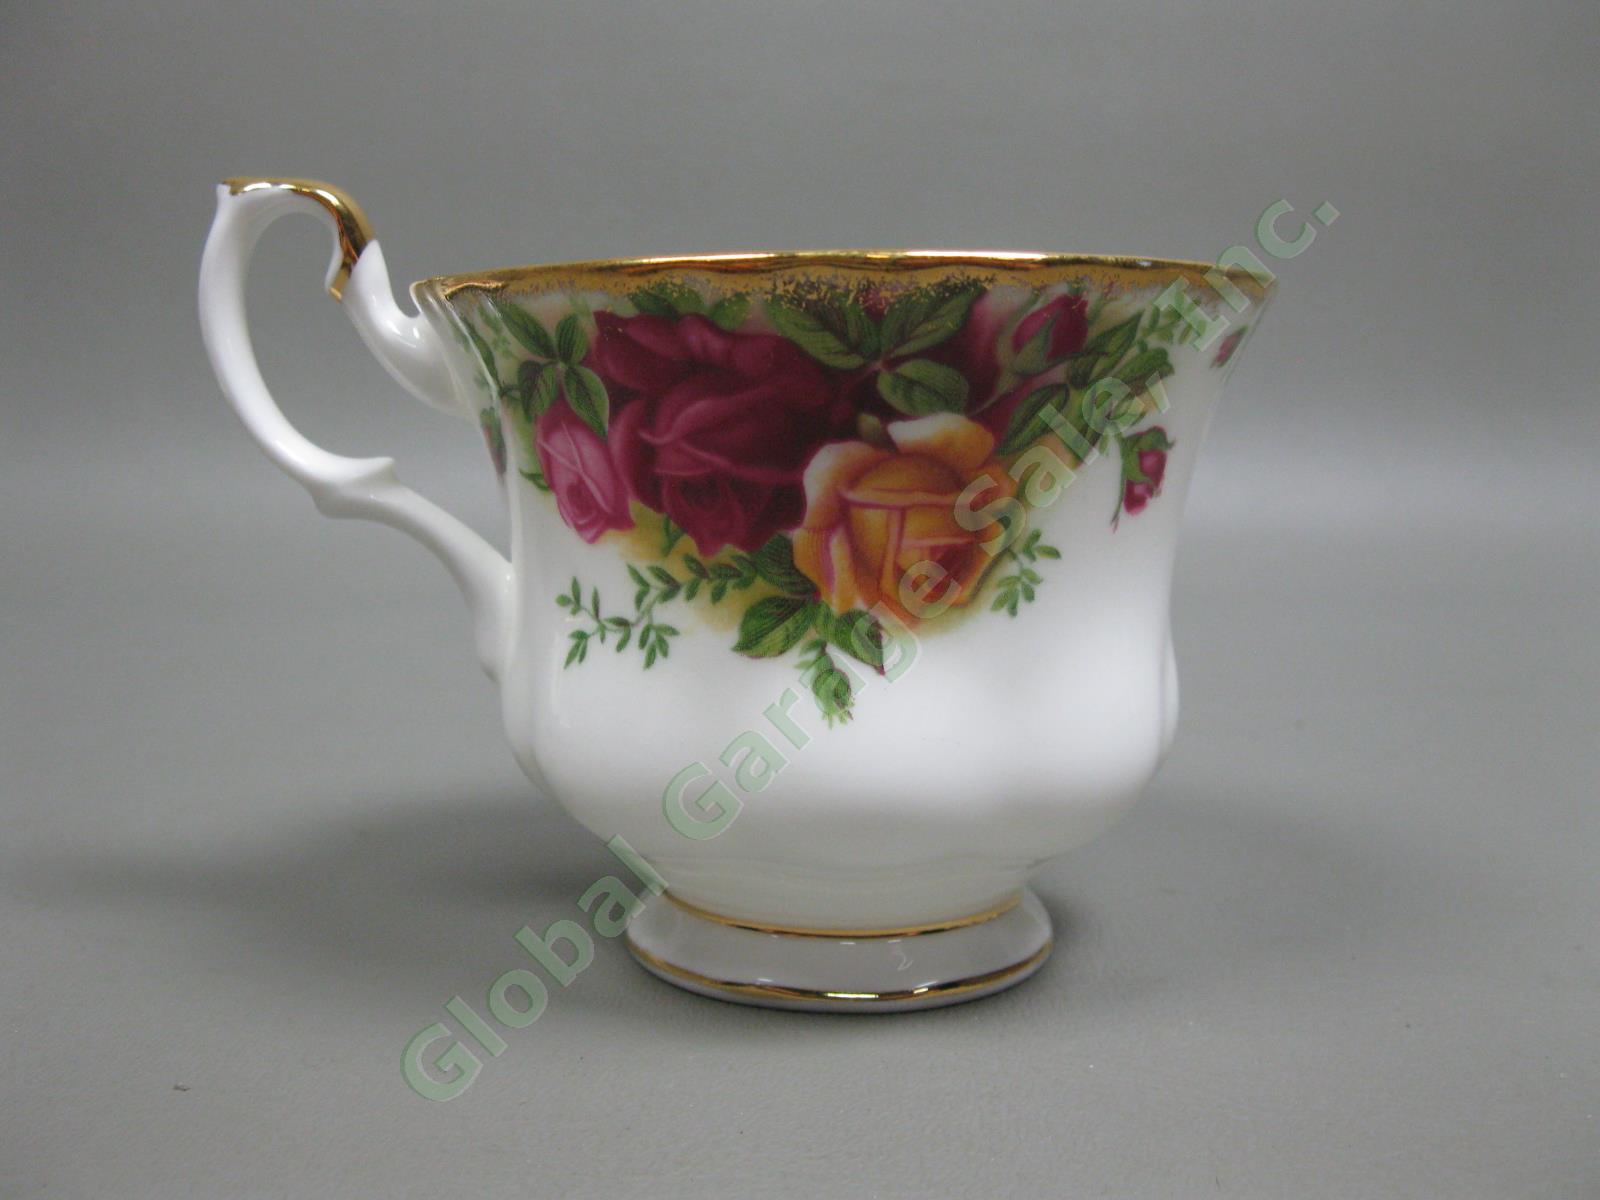 8 Royal Albert Old Country Roses Footed Tea Cup/Saucer Gold Trim Bone China Set 3